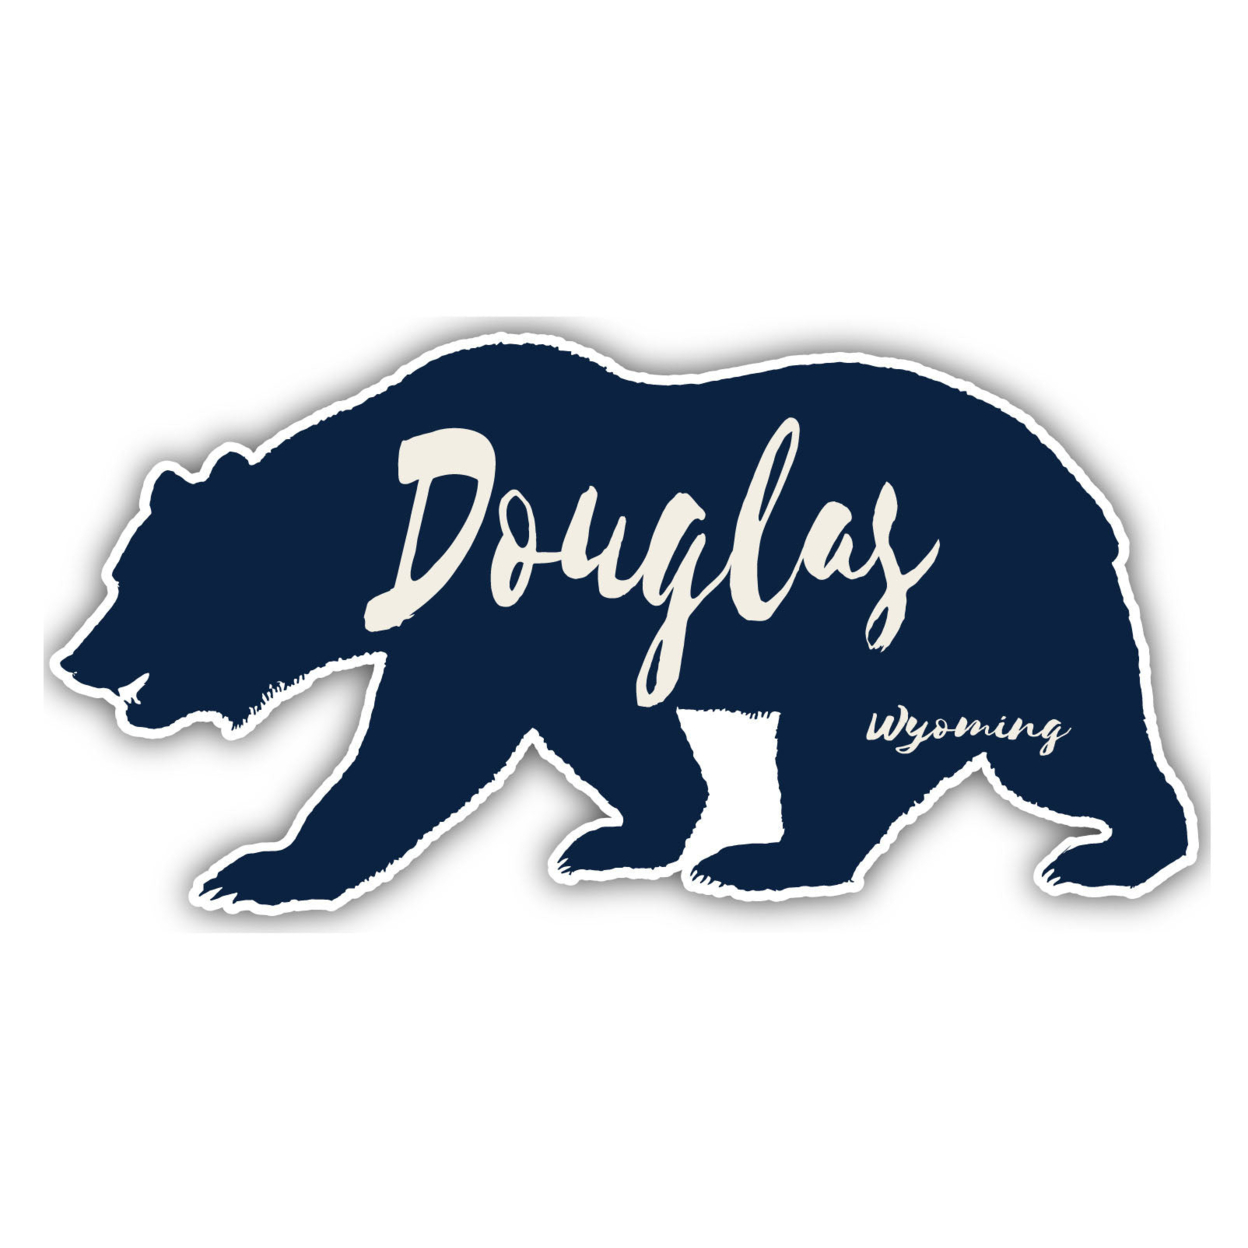 Douglas Wyoming Souvenir Decorative Stickers (Choose Theme And Size) - Single Unit, 2-Inch, Great Outdoors